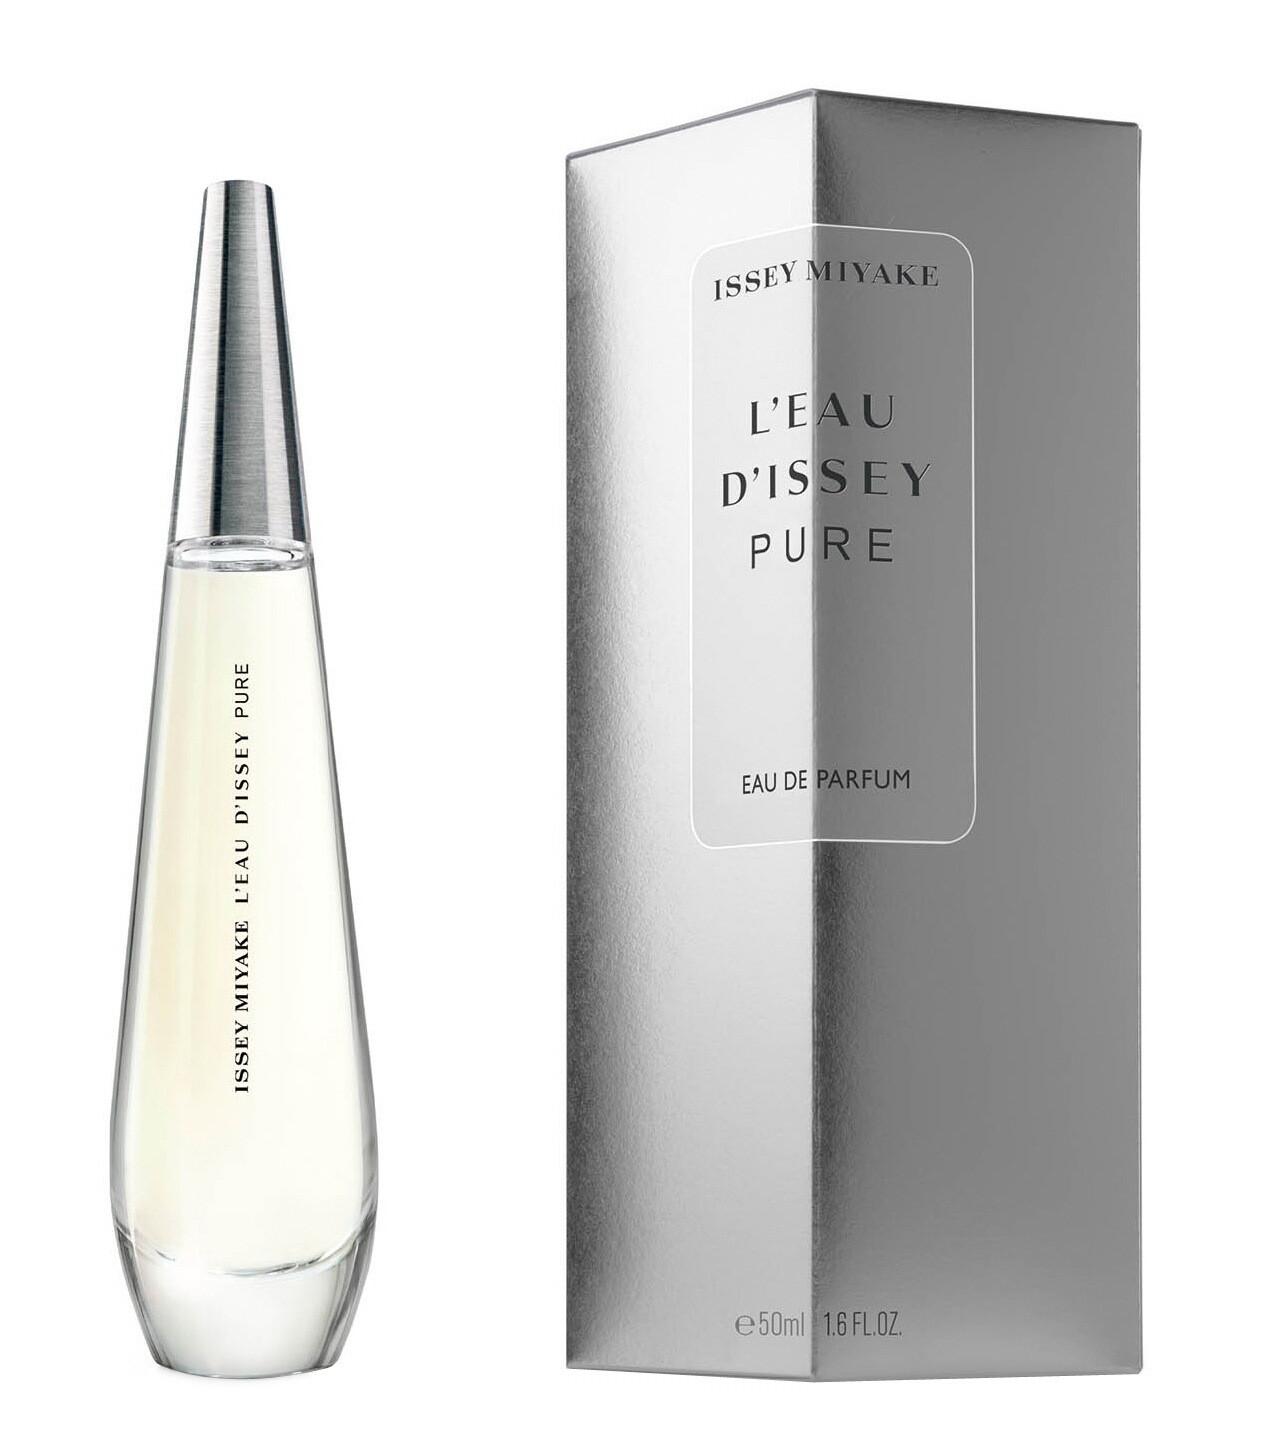 L'Eau d'Issey Pure - Issey Miyake